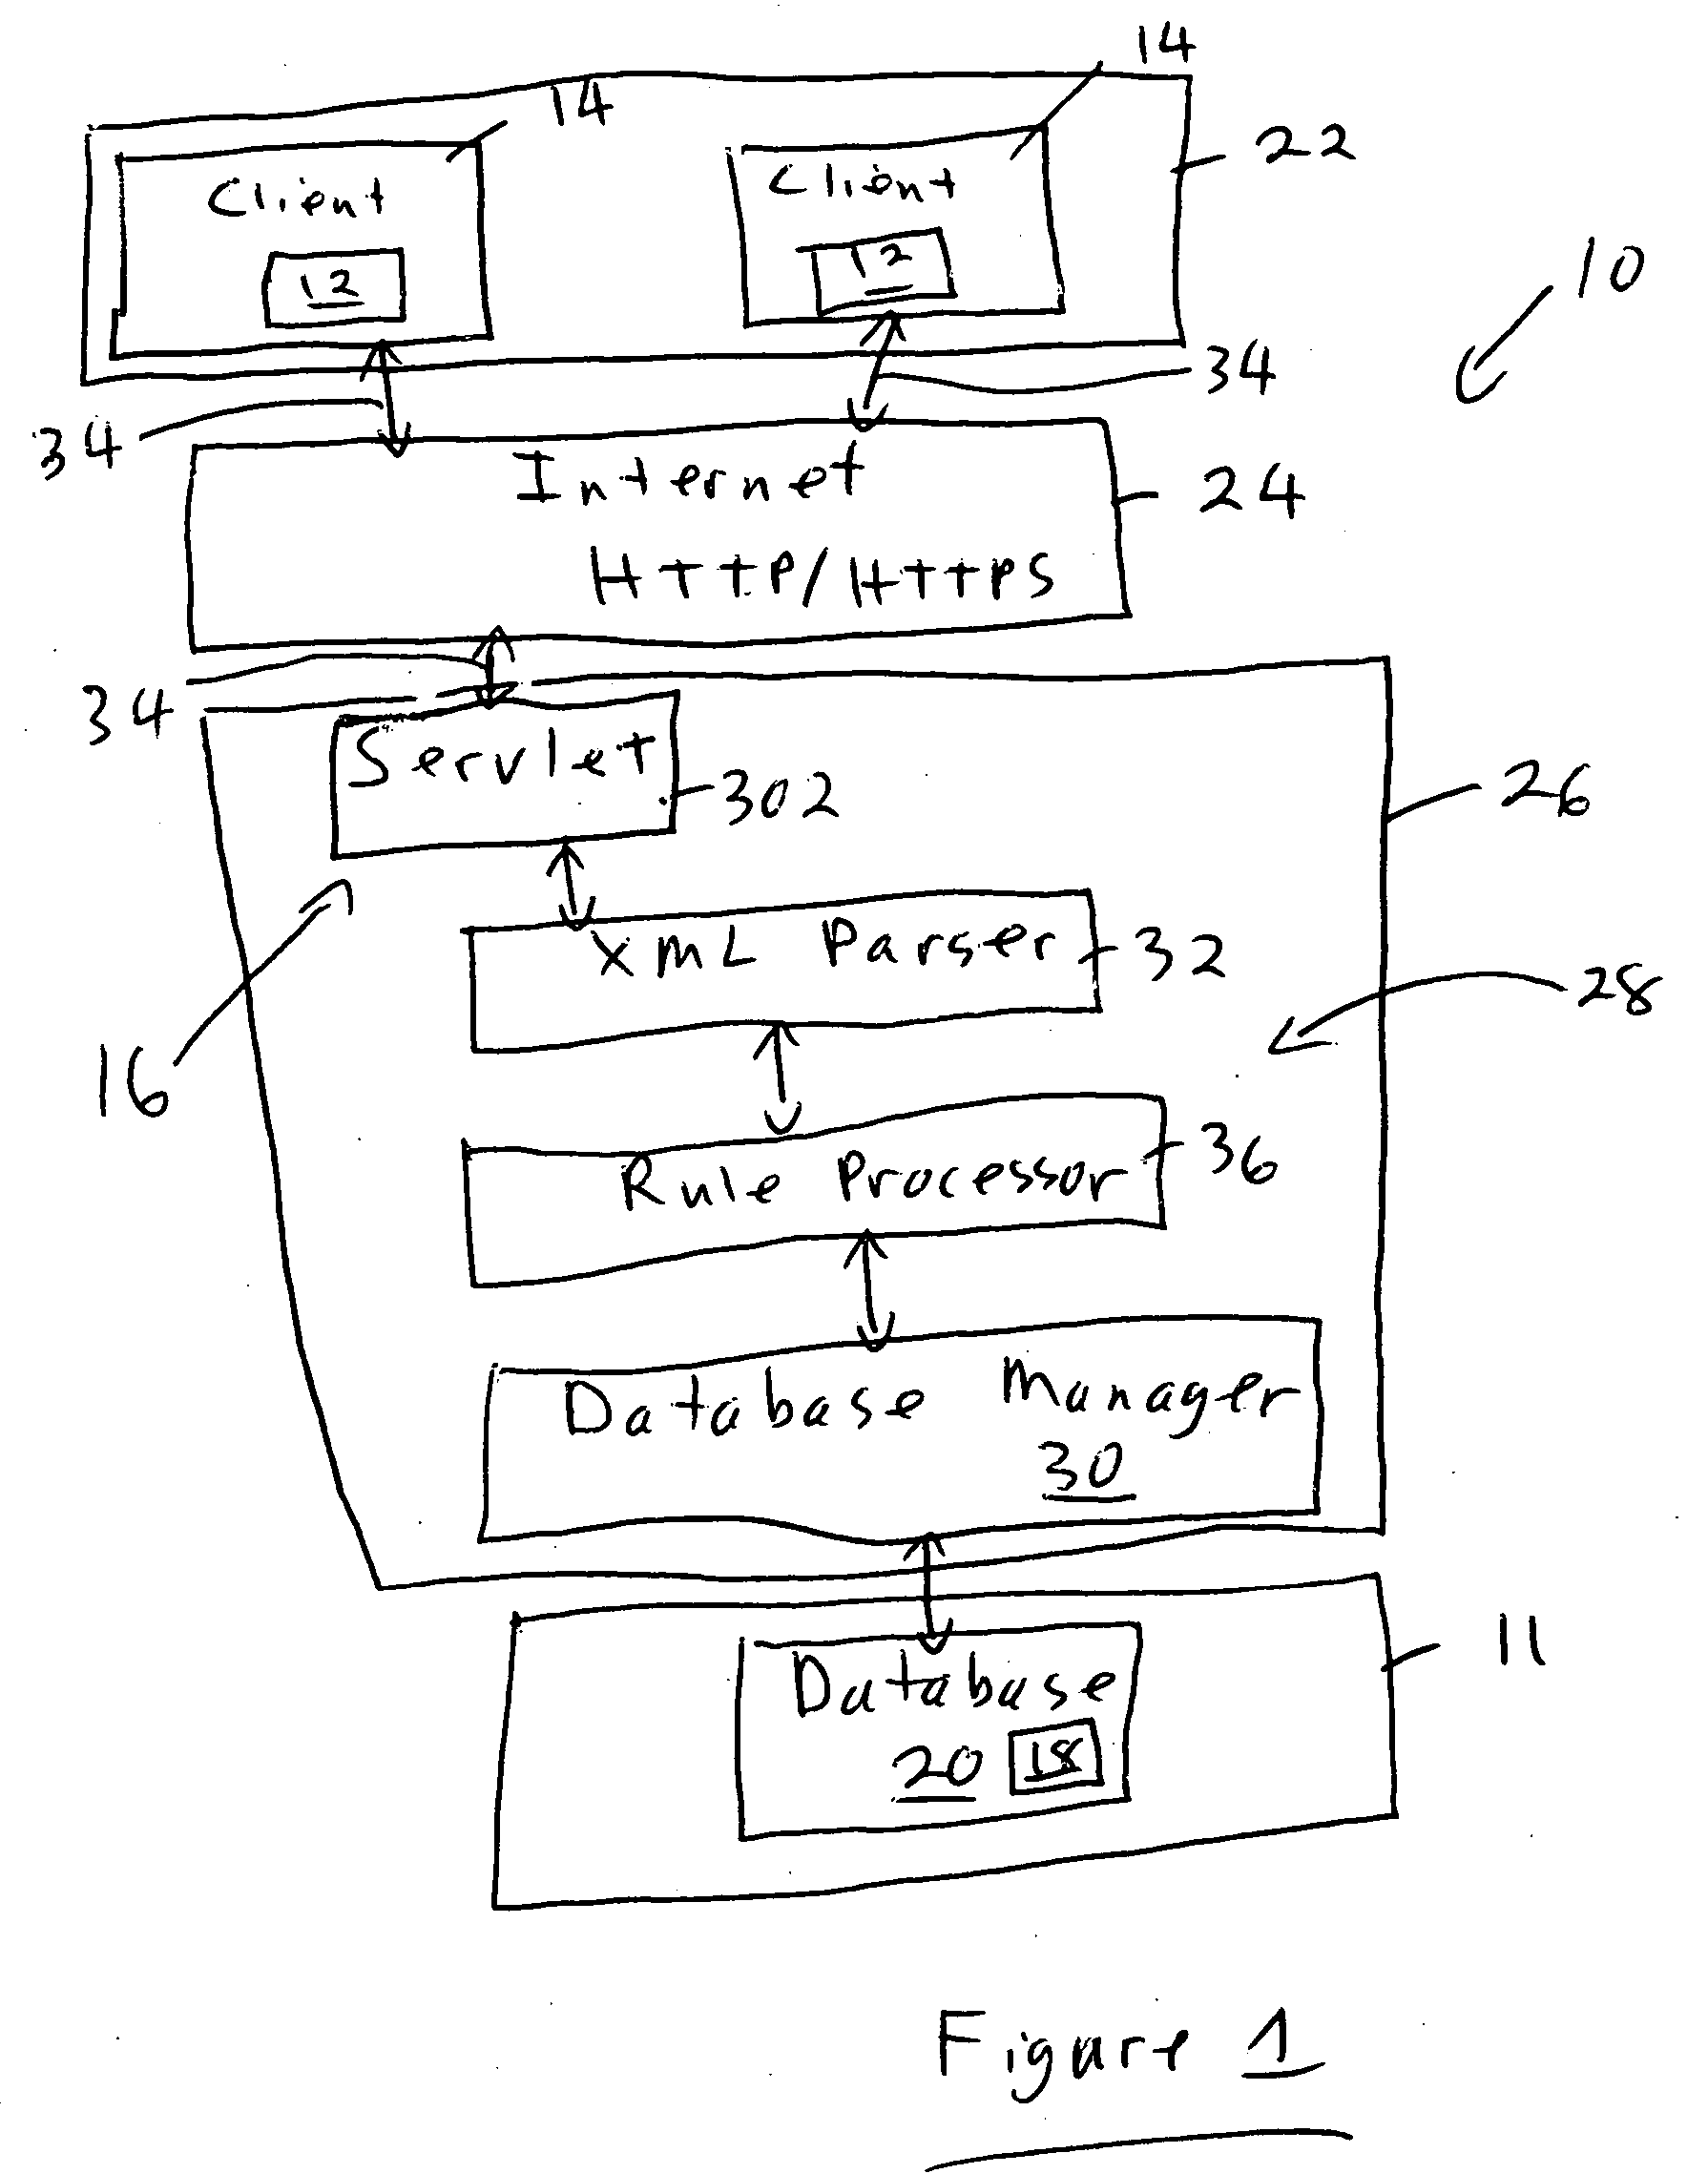 System and method for providing forms on a user interface